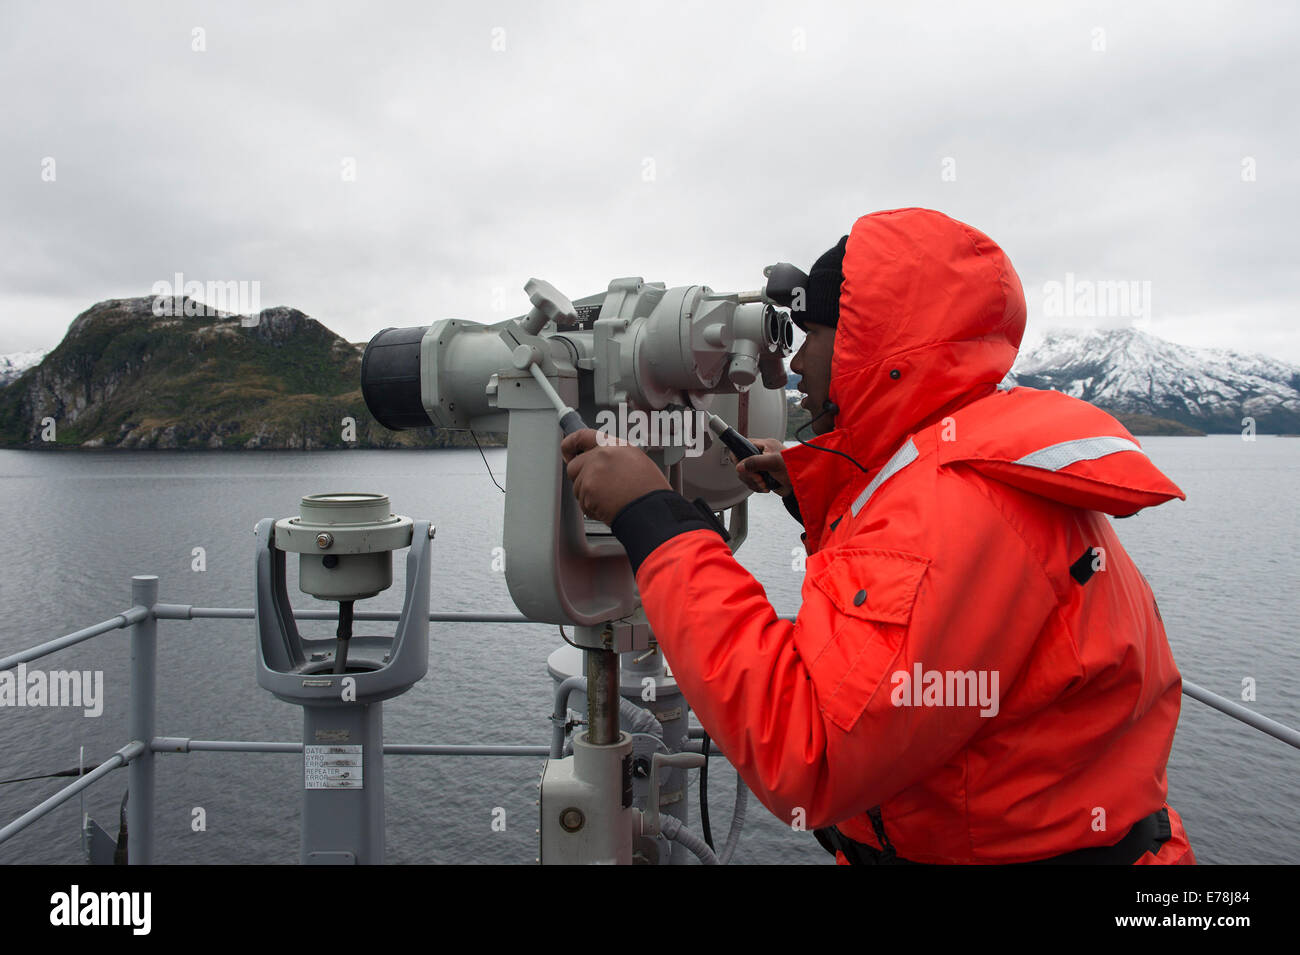 U.S. Navy Seaman Apprentice Petit Fr?re Samuel looks through the ship?s binoculars to conduct a course survey aboard the amphibious assault ship USS America (LHA 6) Aug. 20, 2014, in the Strait of Magellan. The ship embarked on a mission to conduct traini Stock Photo